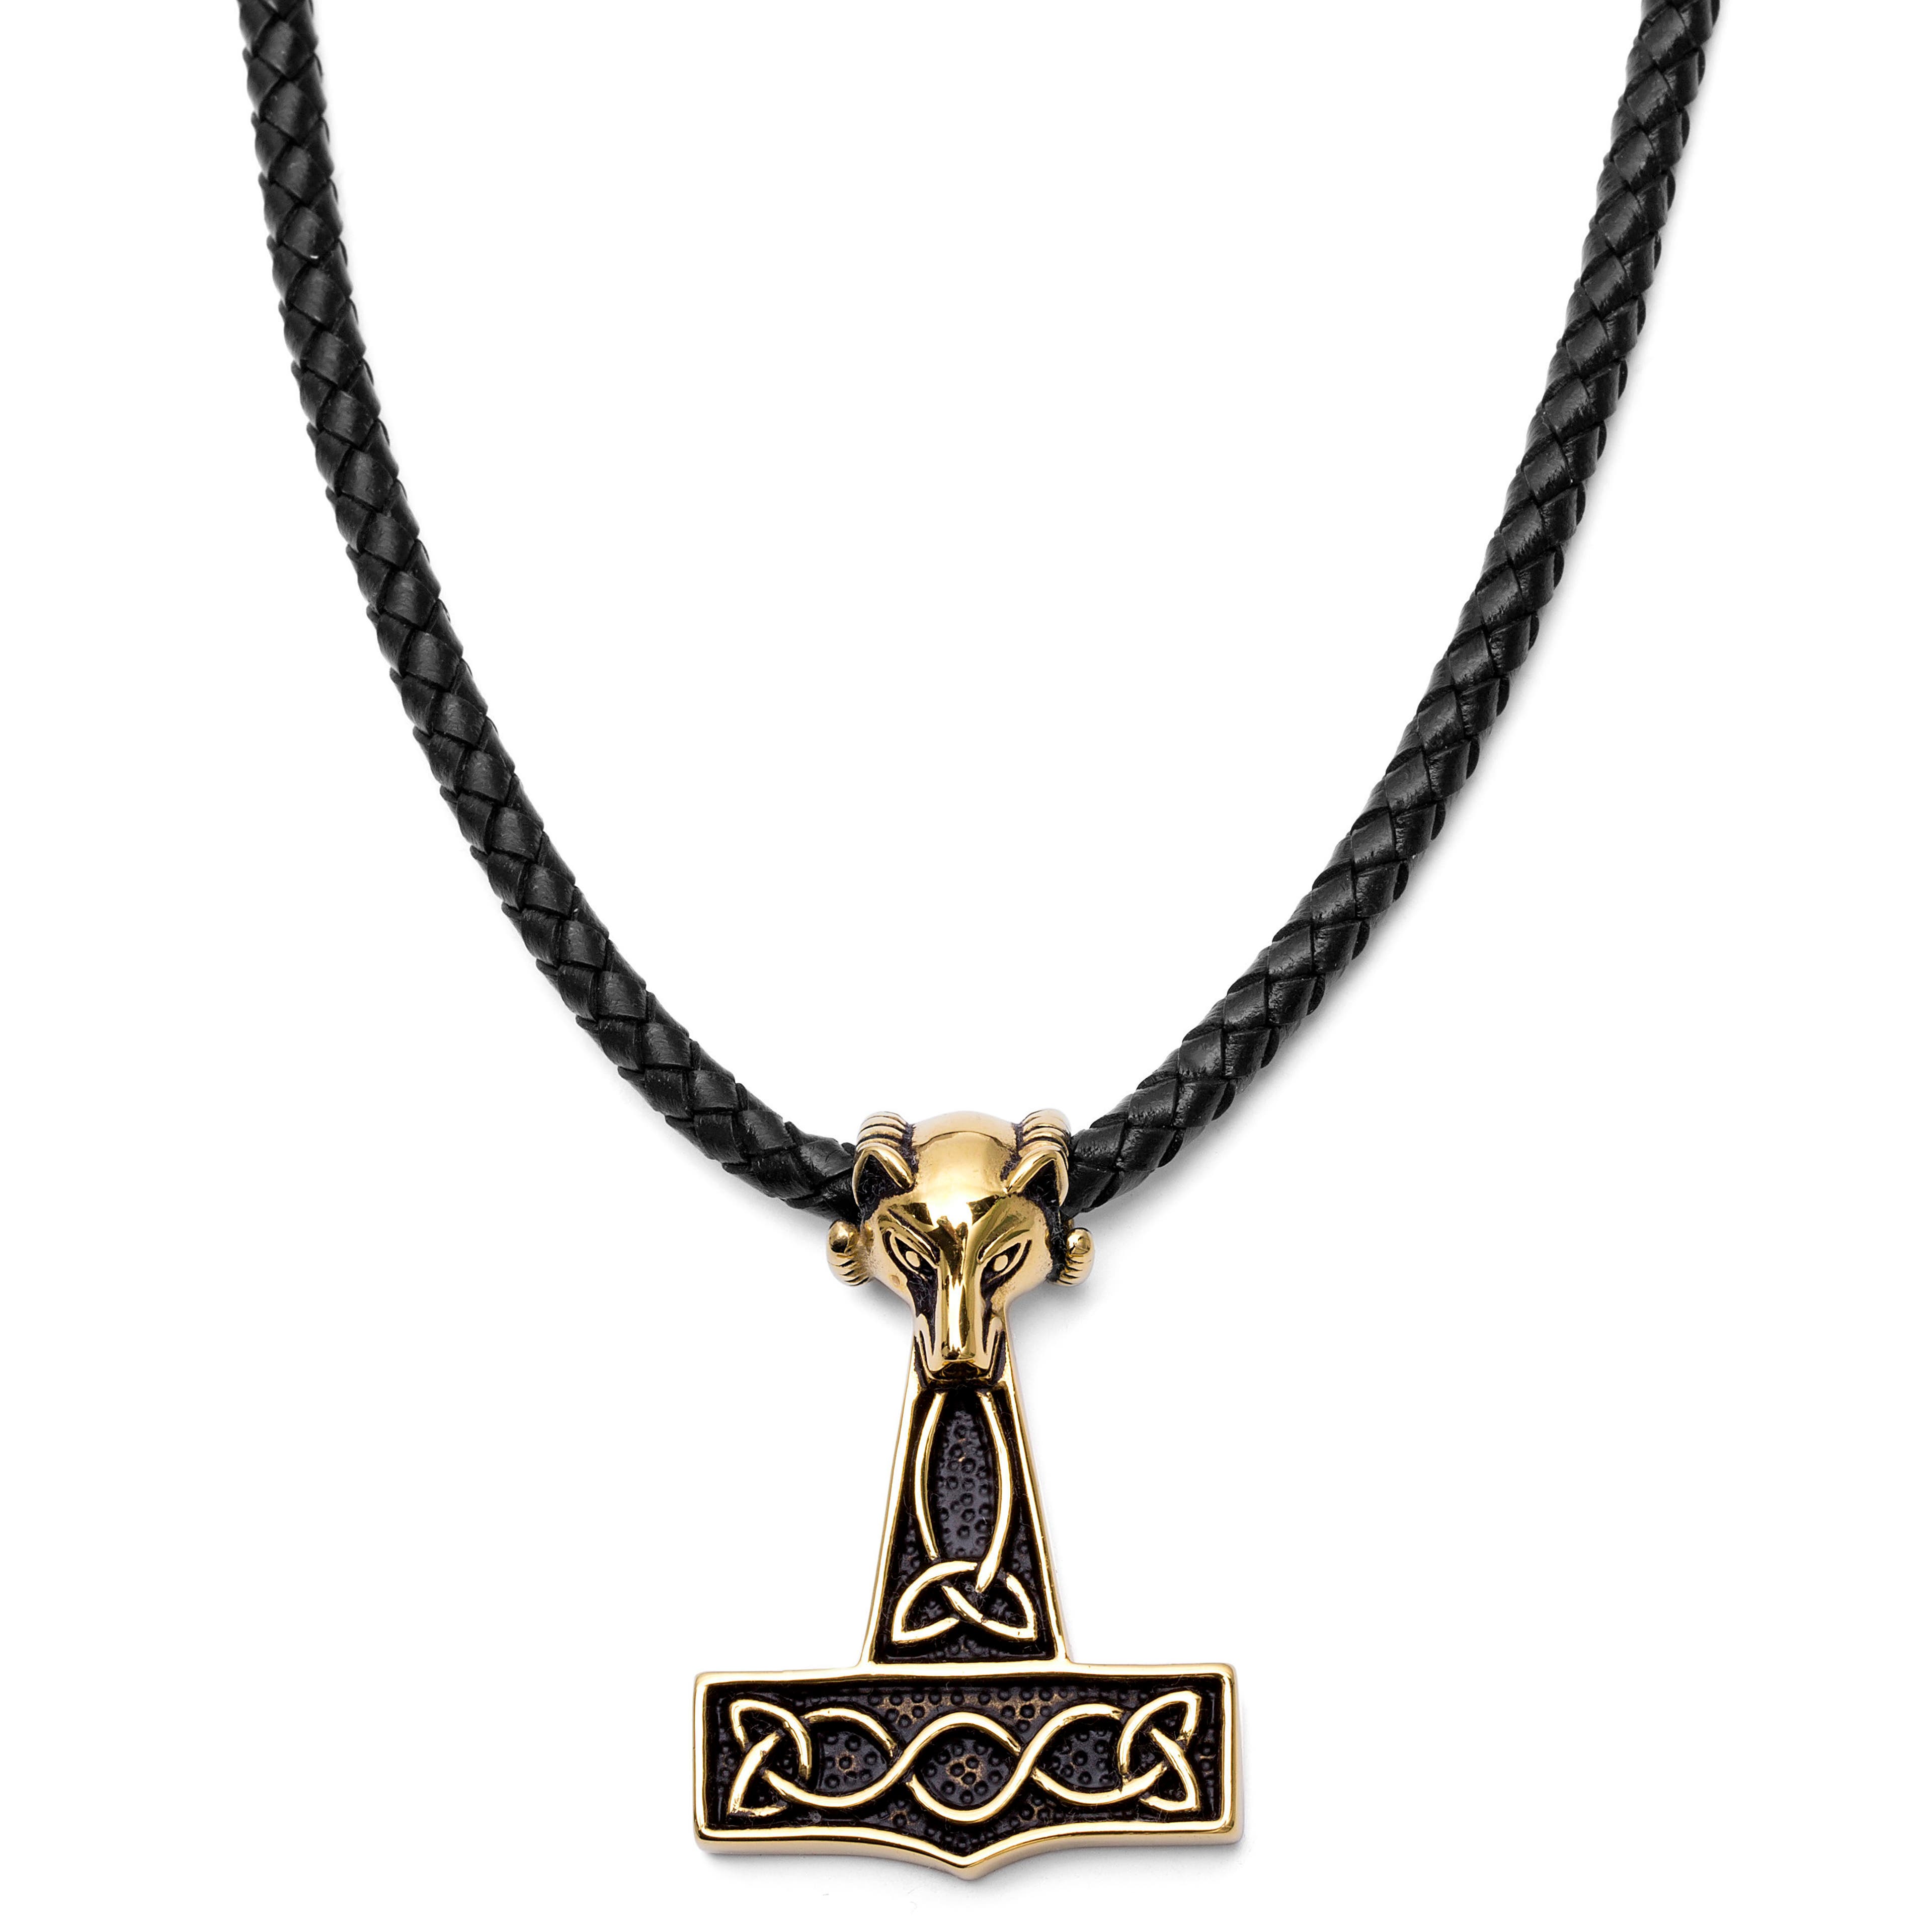 Black Leather With Gold-Tone Wolf & Thor's Hammer Necklace